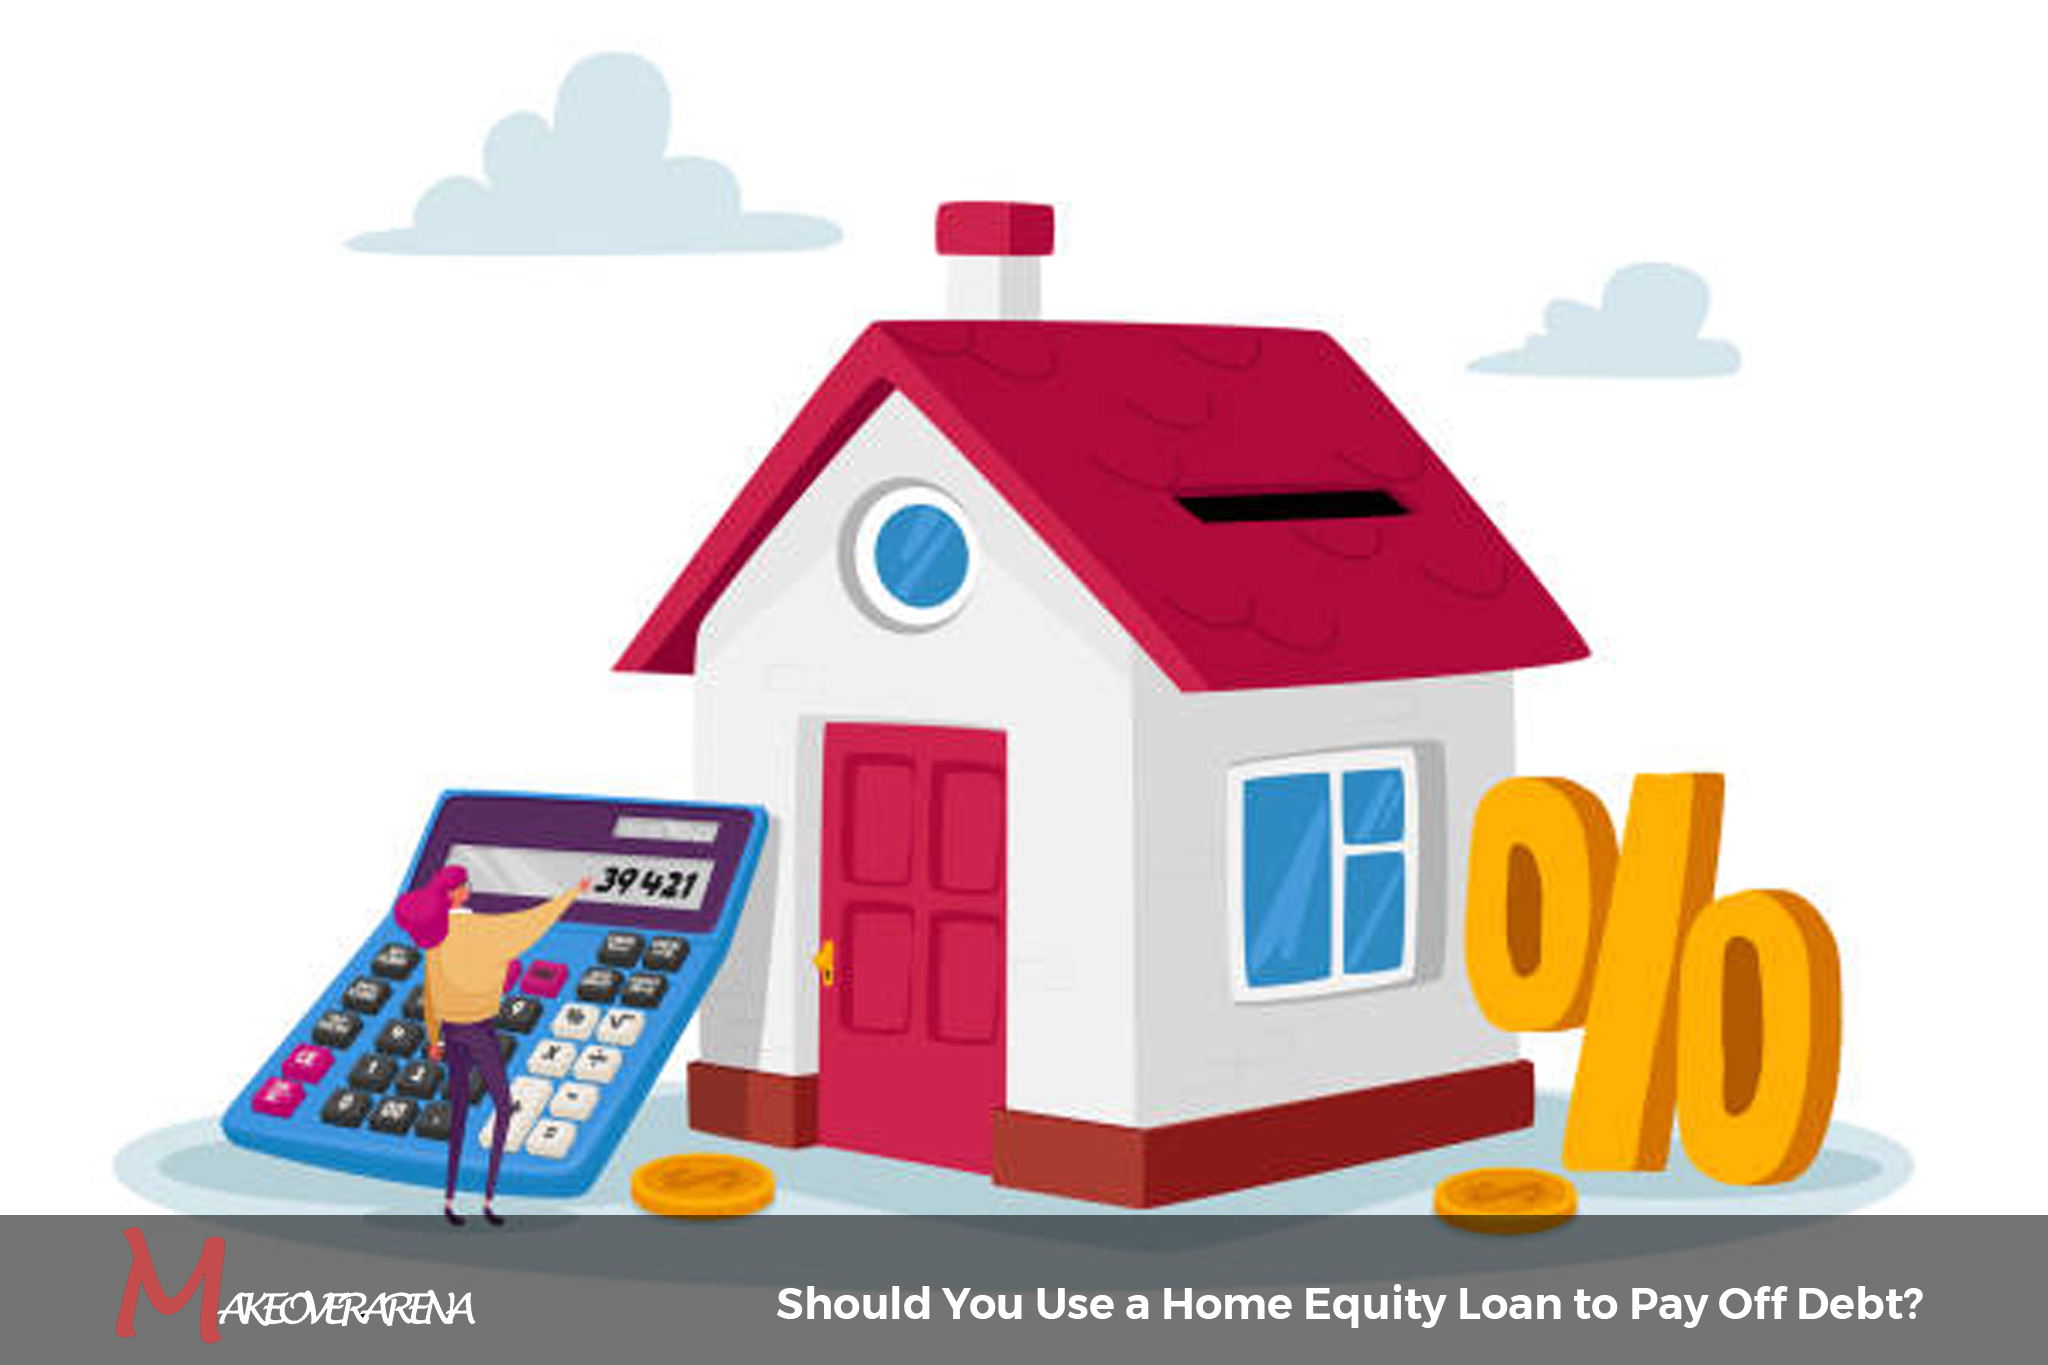 Should You Use a Home Equity Loan to Pay Off Debt?